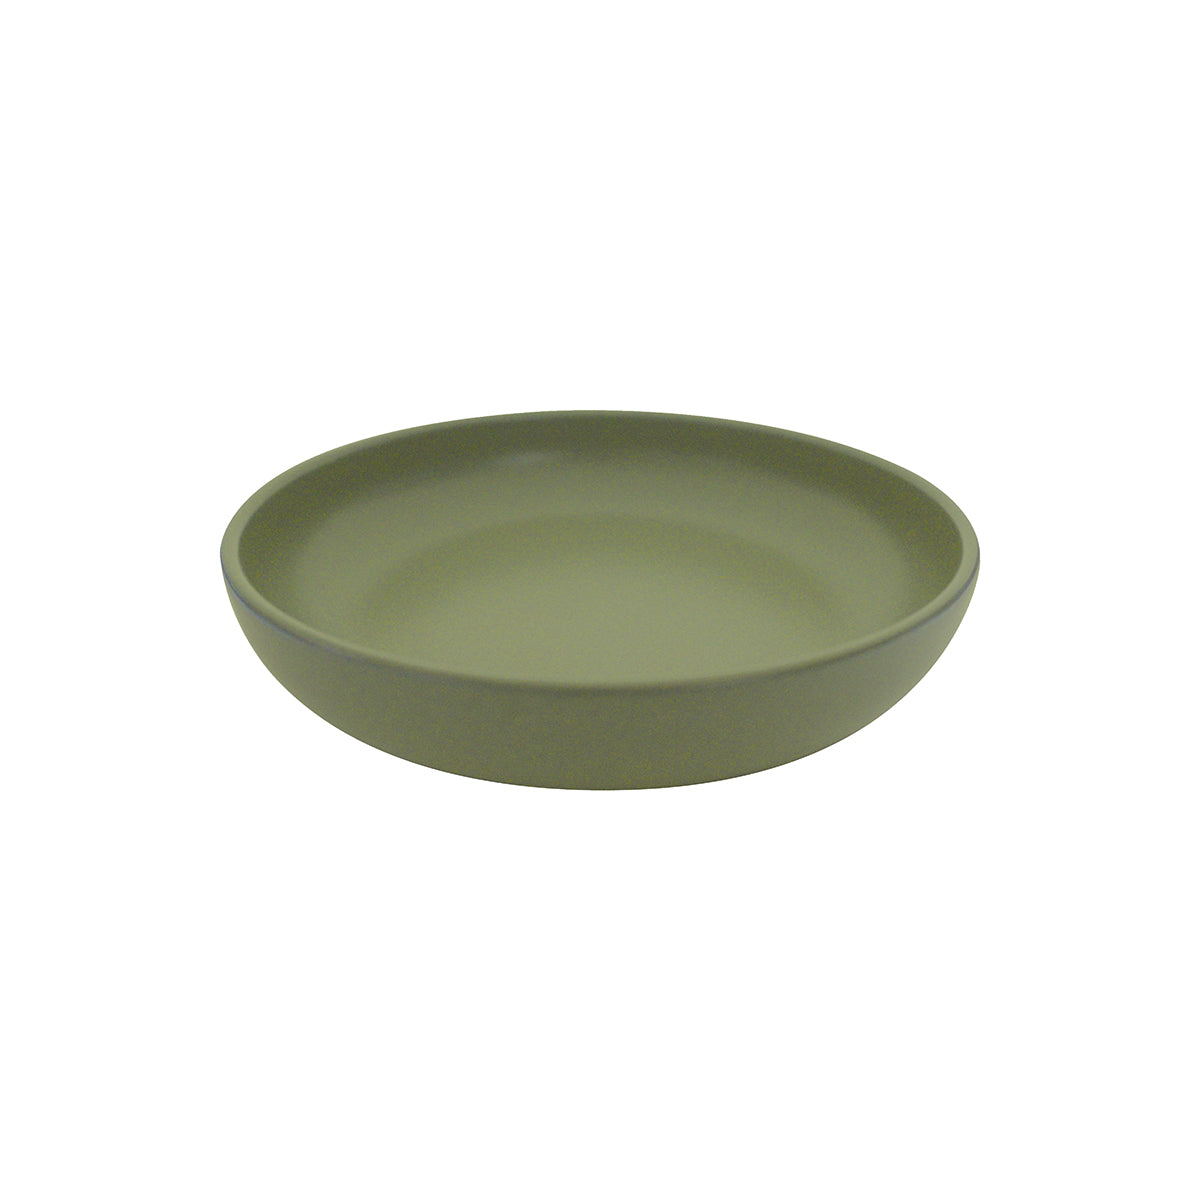 Round Bowl - 220mm, Green, Eclipse: Pack of 2